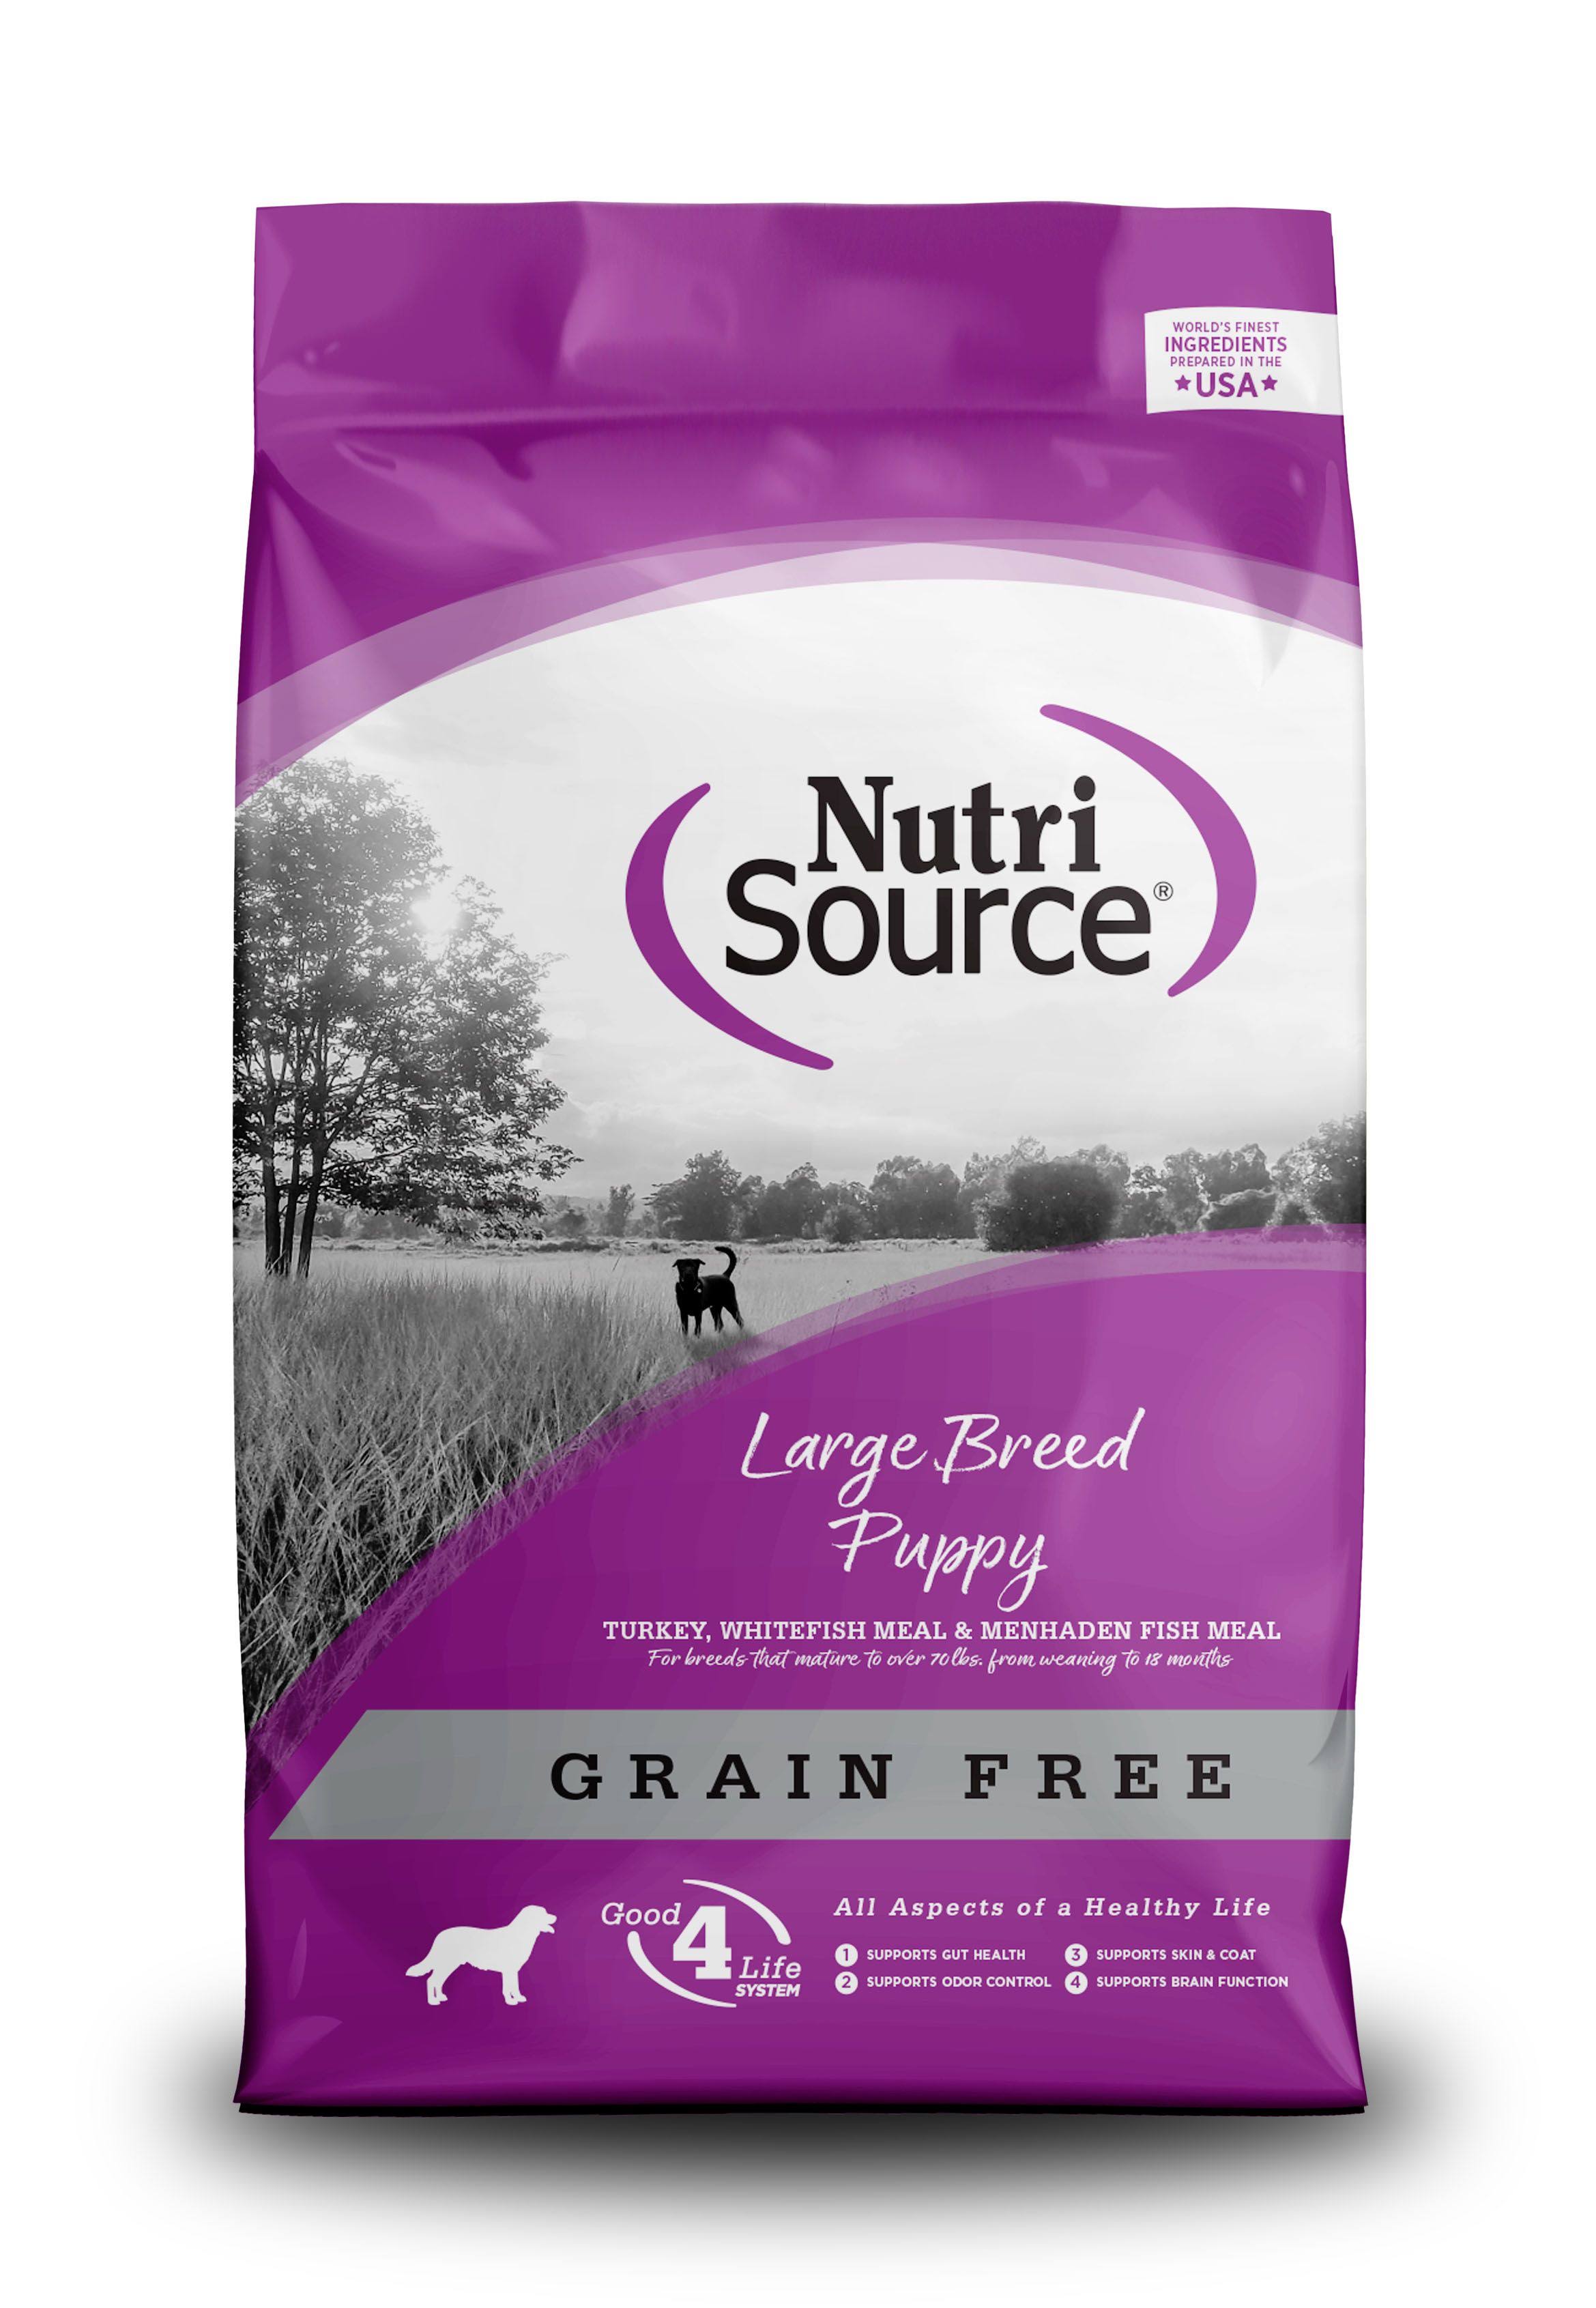 NutriSource Large Breed Puppy Grain-Free Dry Dog Food 15 lbs